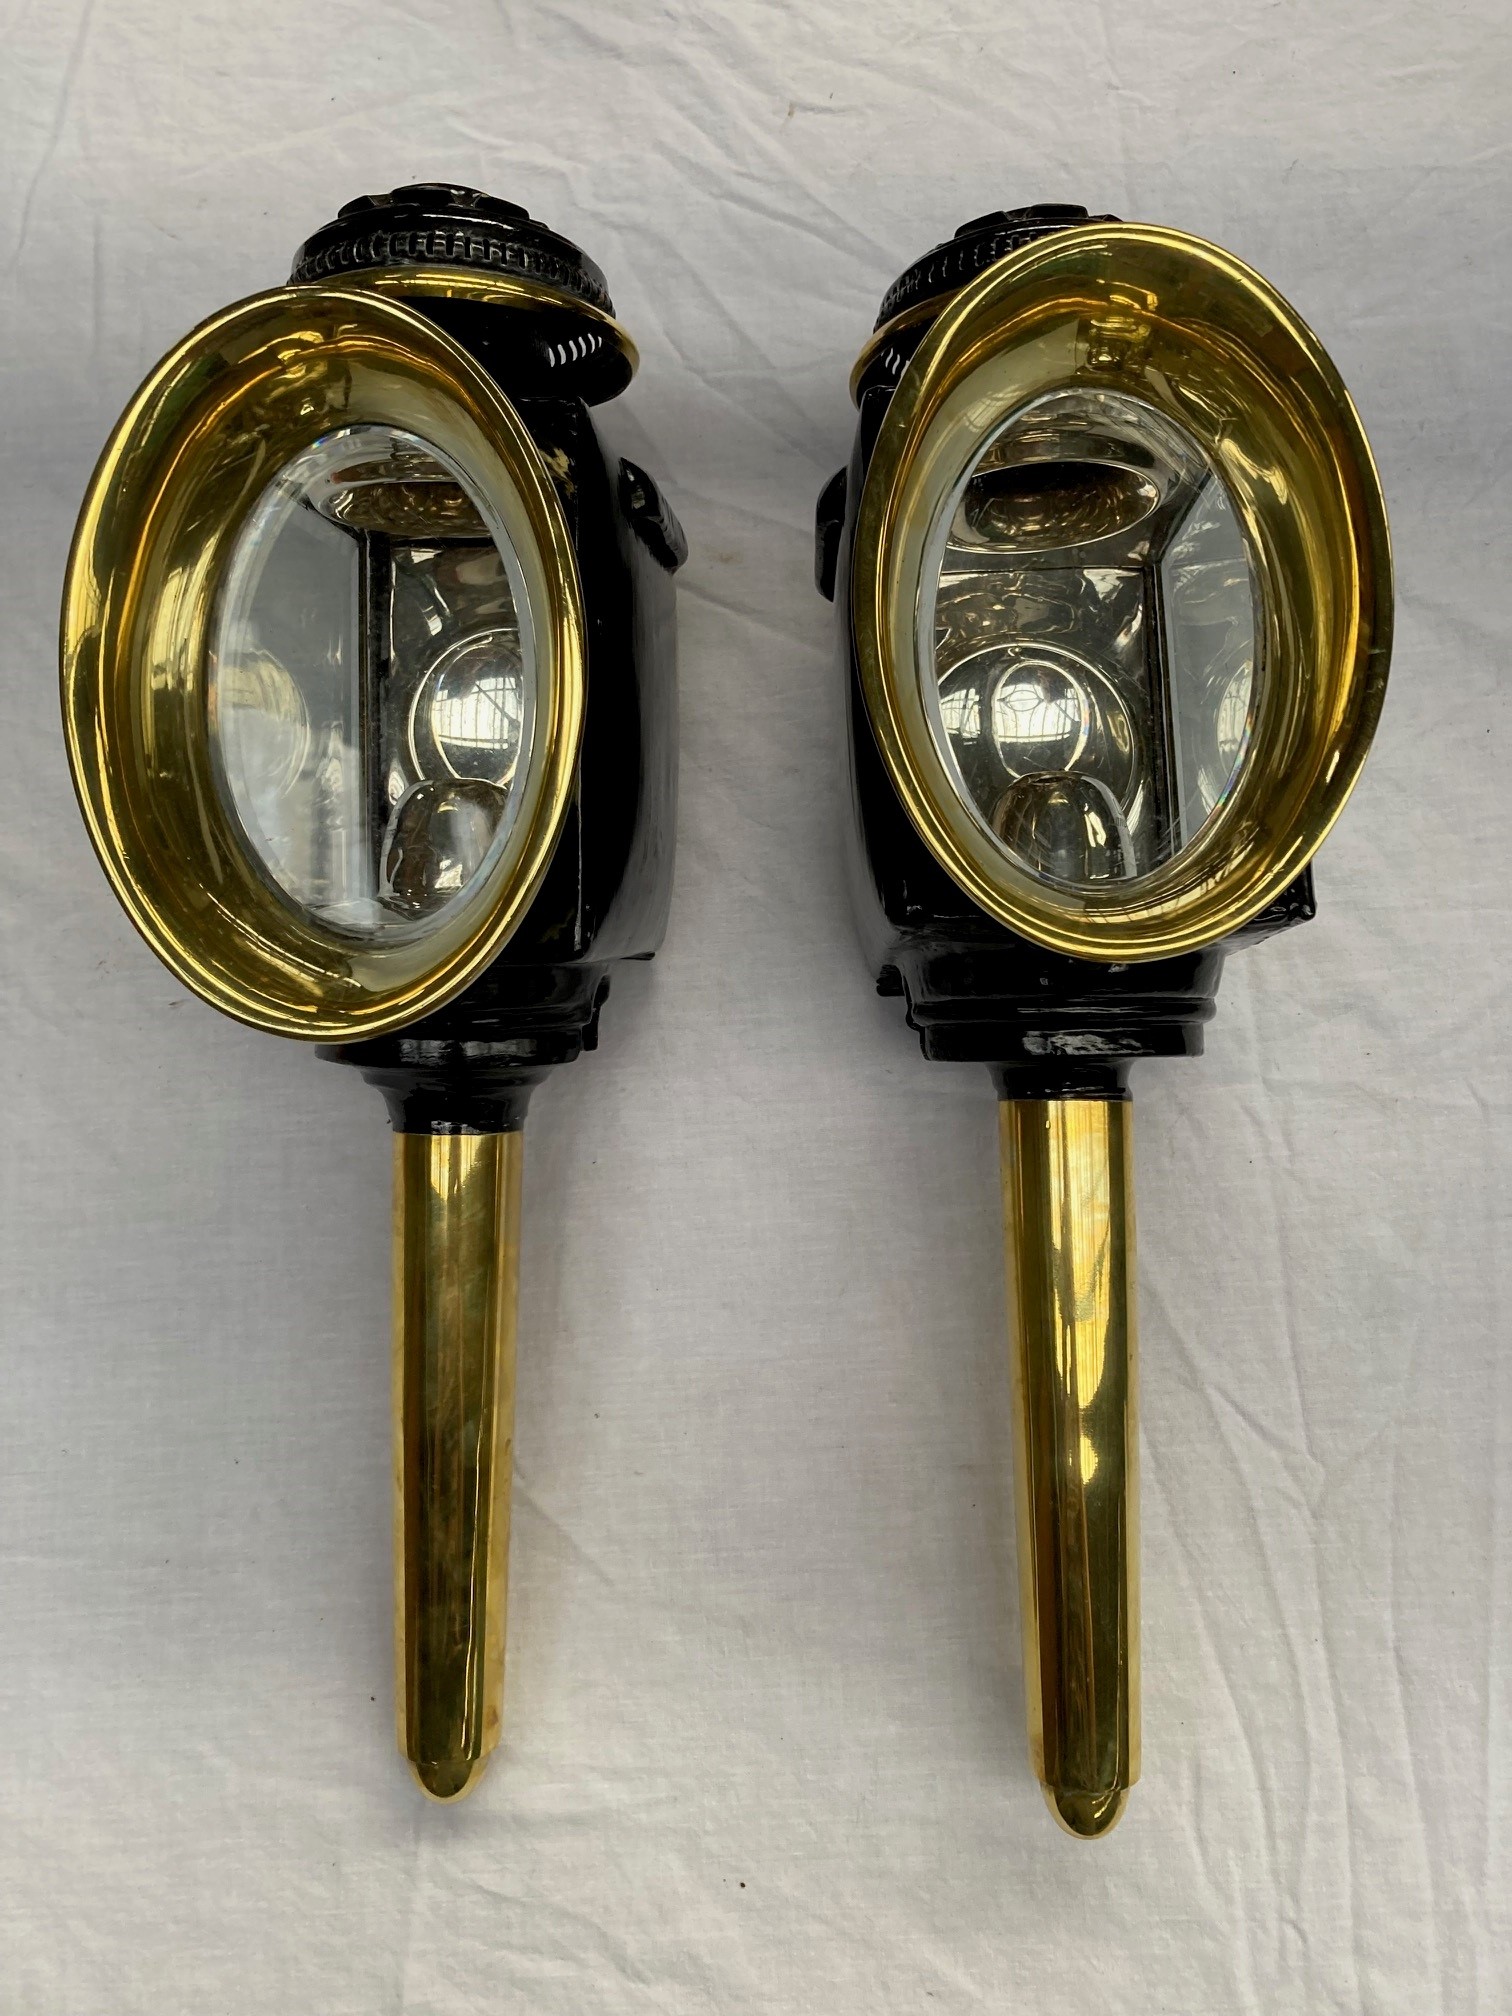 Pair of oval fronted lamps and rear lamp with bracket, by Lawton.